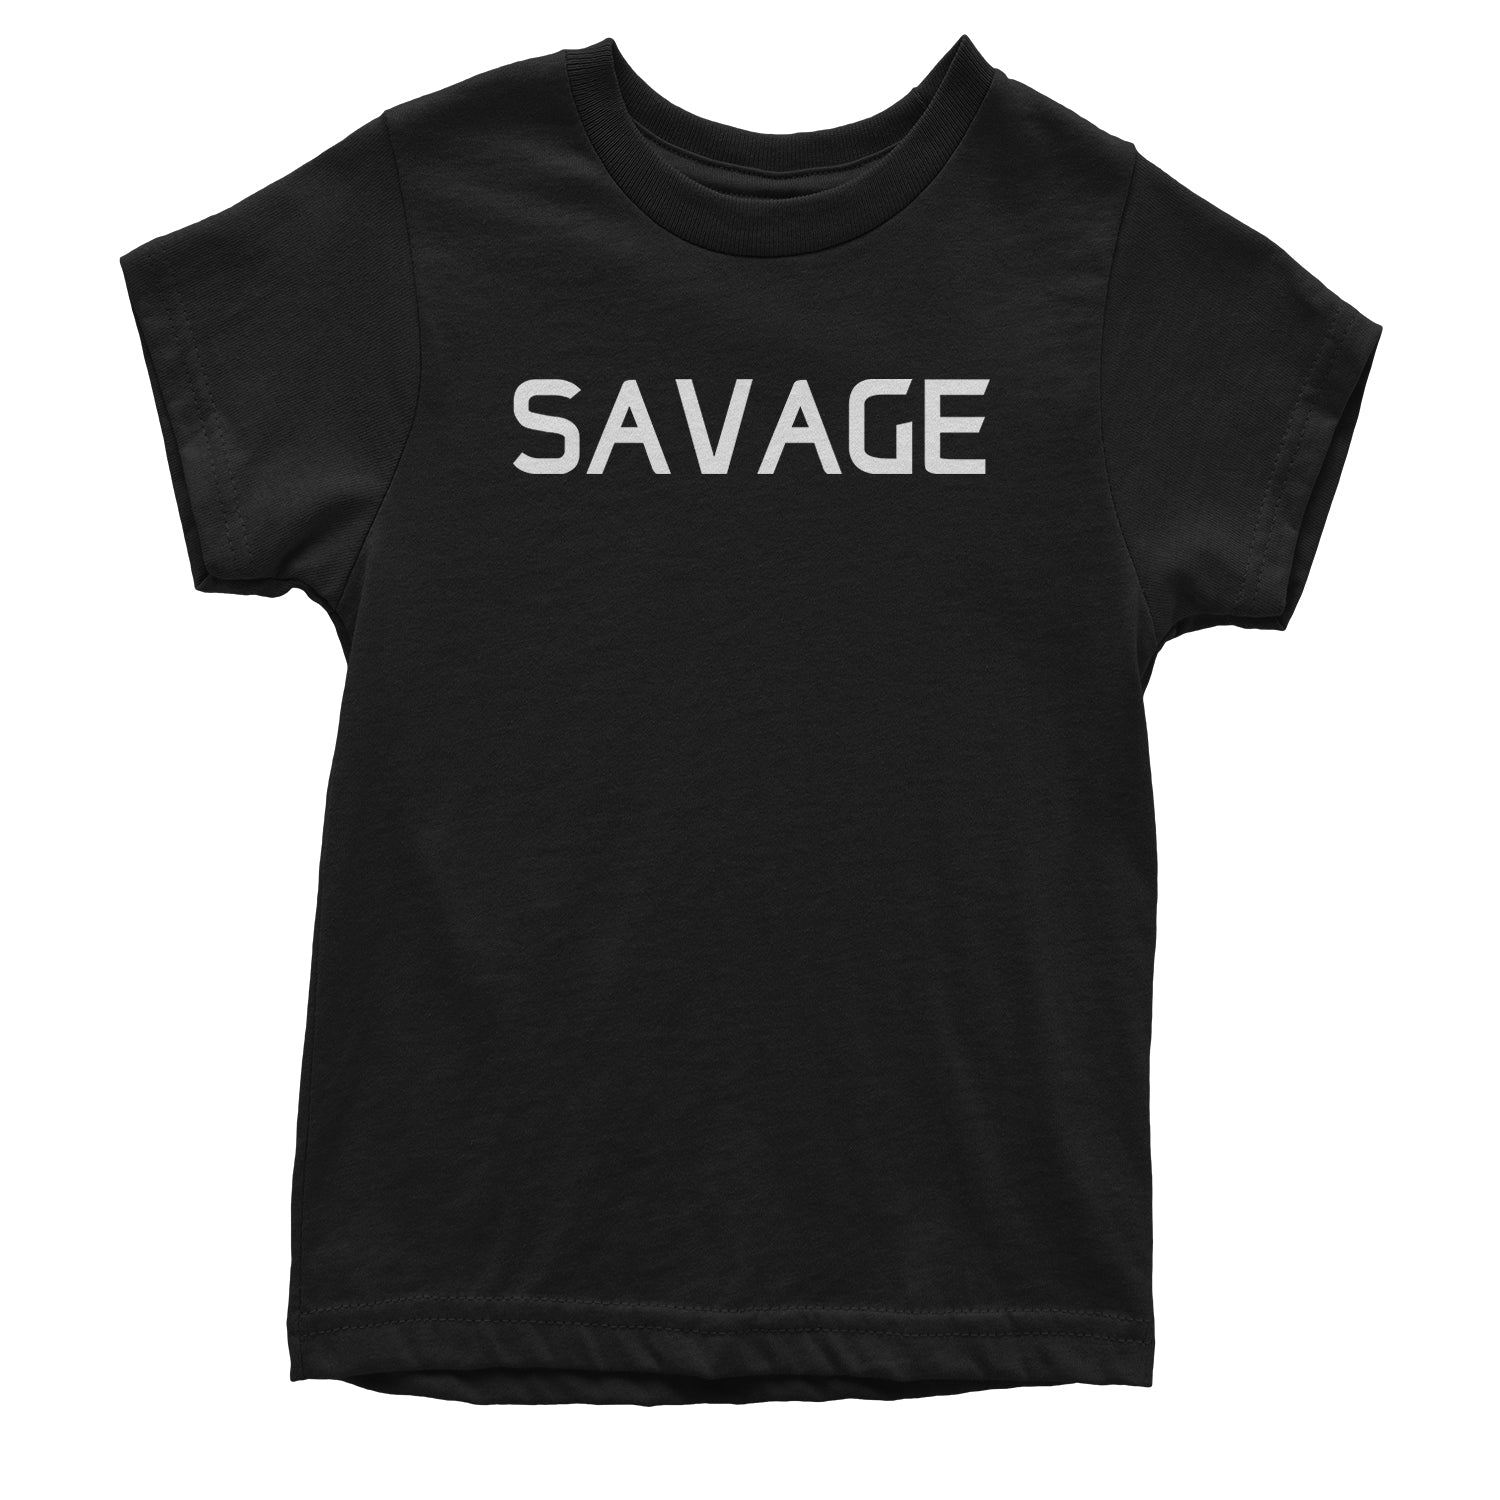 Savage Youth T-shirt #expressiontees by Expression Tees